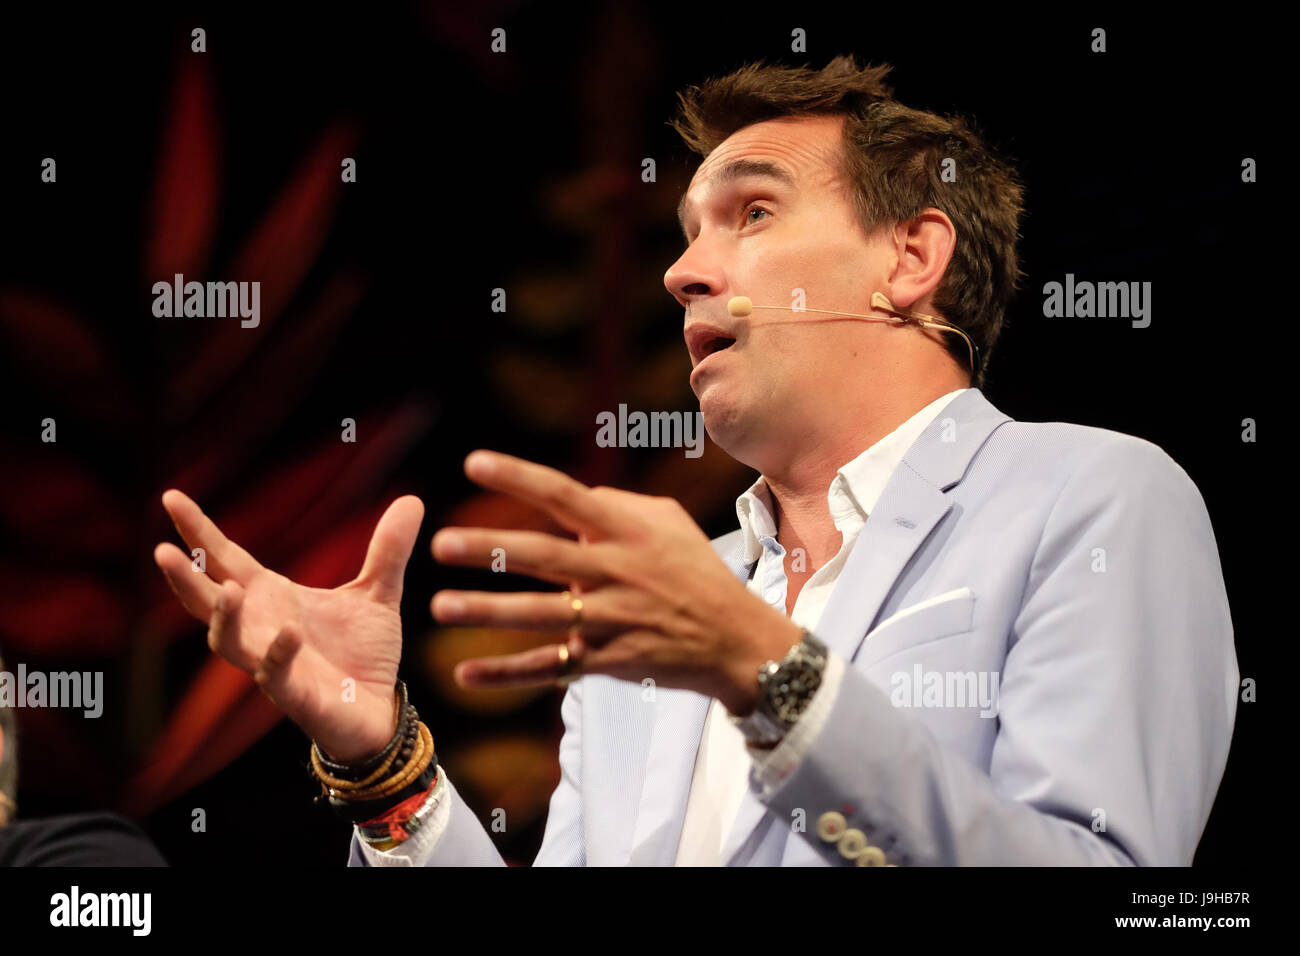 Hay Festival 2017 - Hay on Wye, Wales, UK - Friday 2nd June 2017 - Peter Frankopan historian and author on stage at the Hay Festival - Frankopan is Director of the Centre for Byzantine Research at Oxford University - the Hay Festival celebrates its 30th anniversary in 2017 - the literary festival runs until Sunday June 4th.  Steven May / Alamy Live News Stock Photo